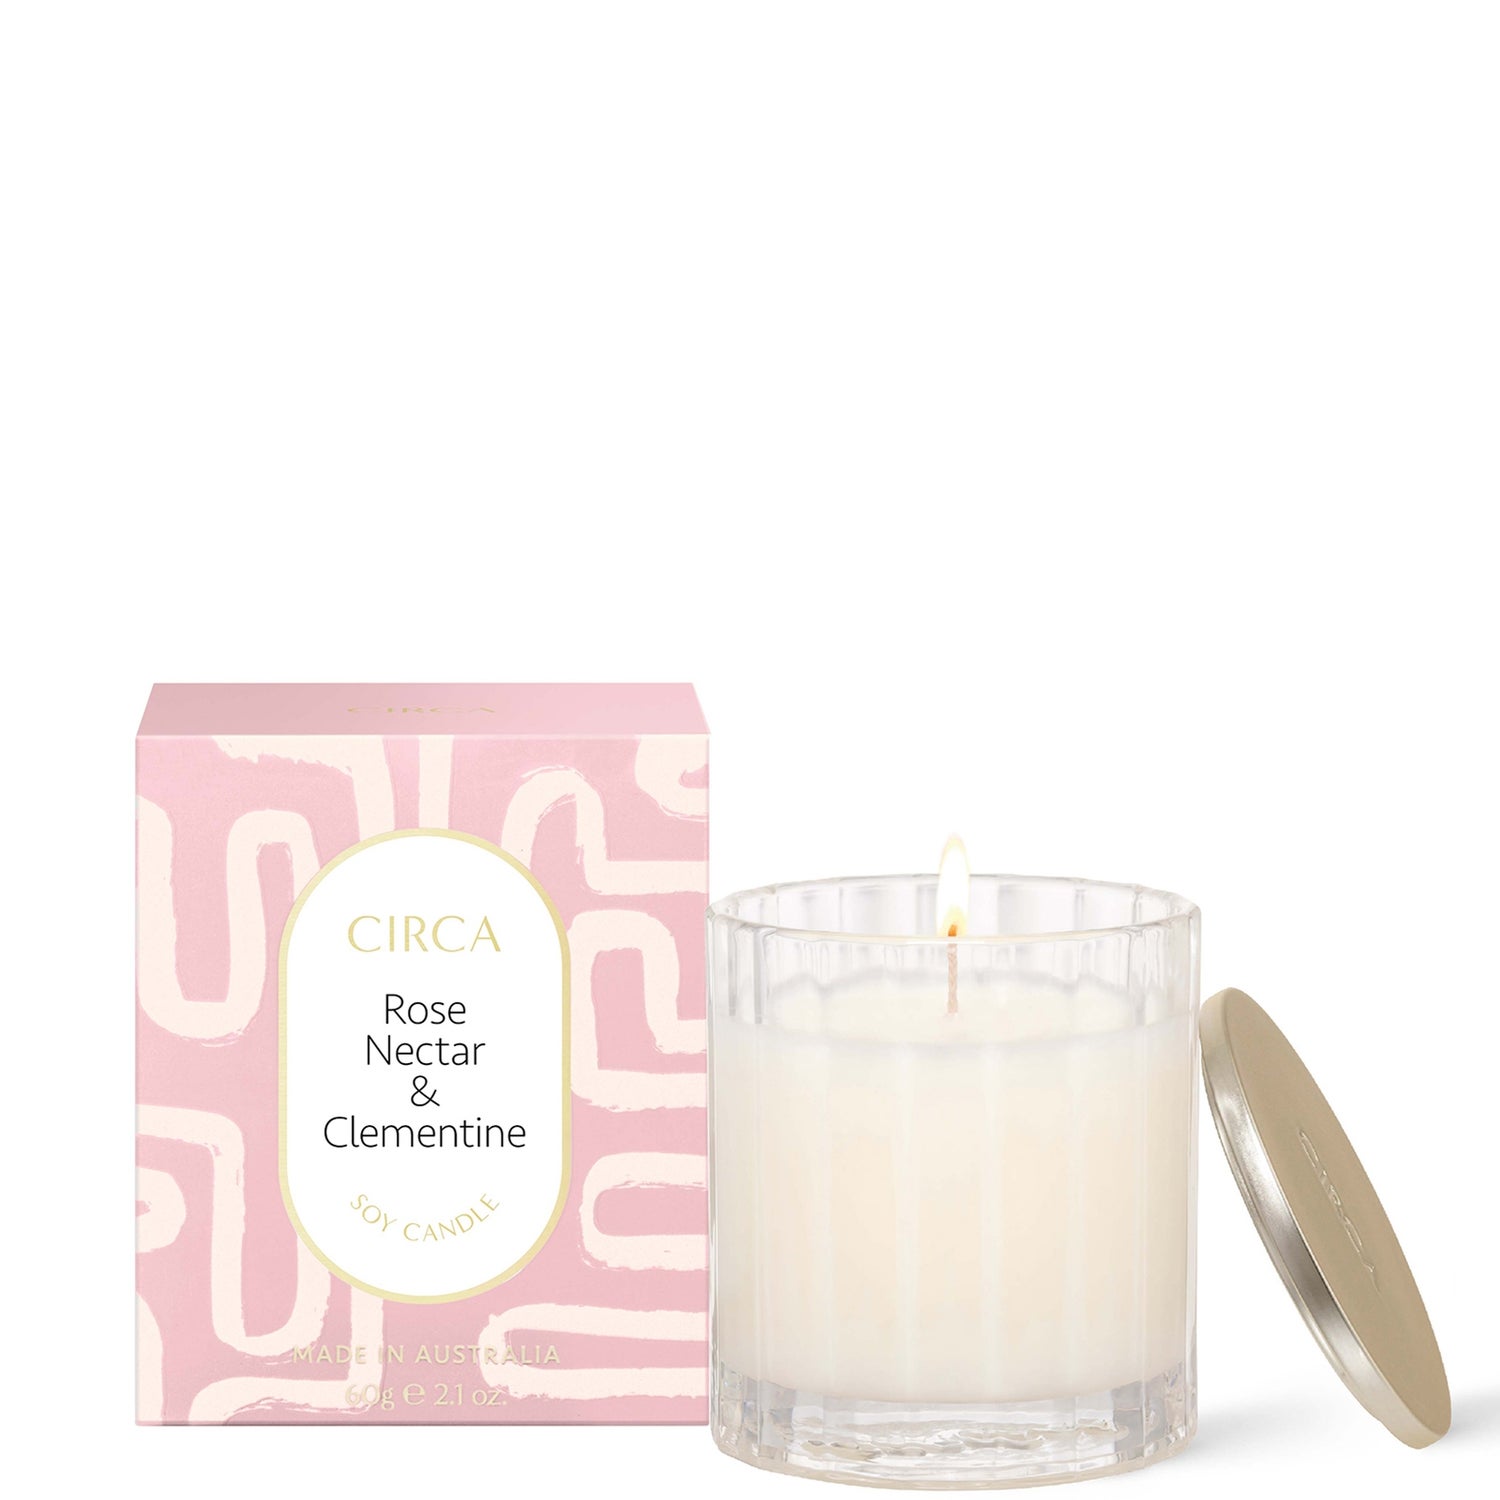 CIRCA Rose Nectar and Clementine Candle 60g